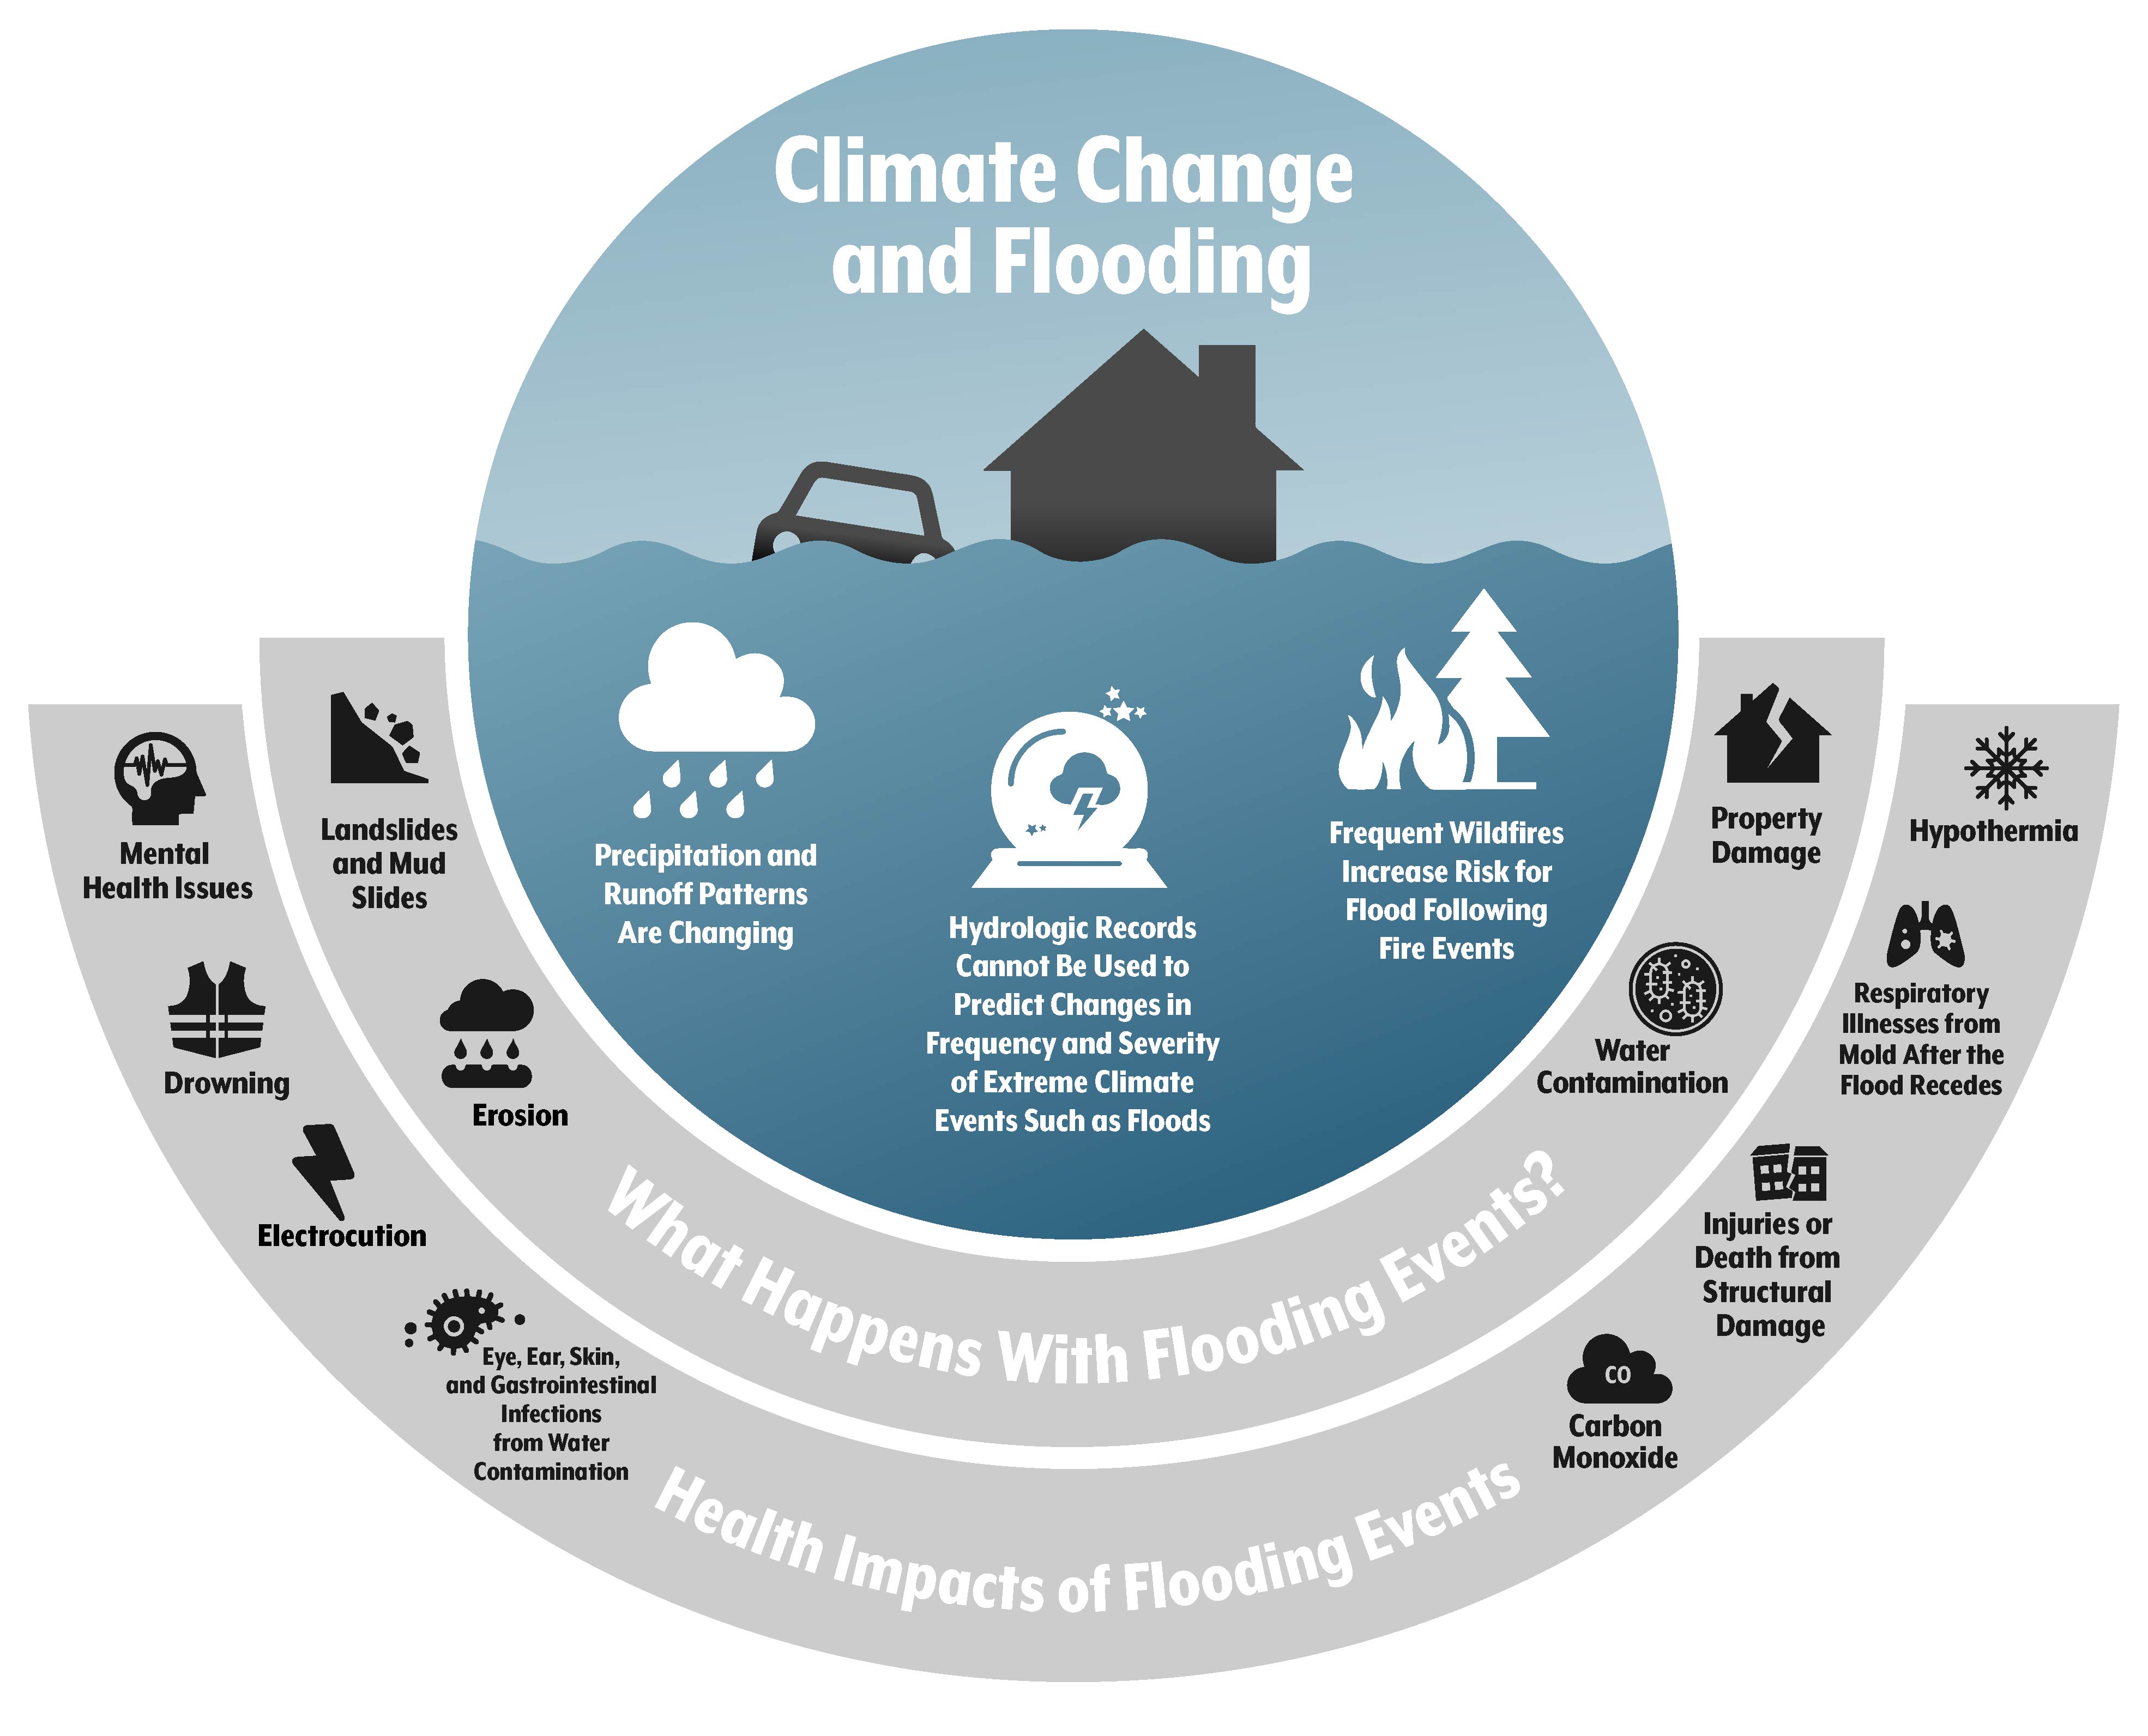 Diagram showing health impacts of flooding